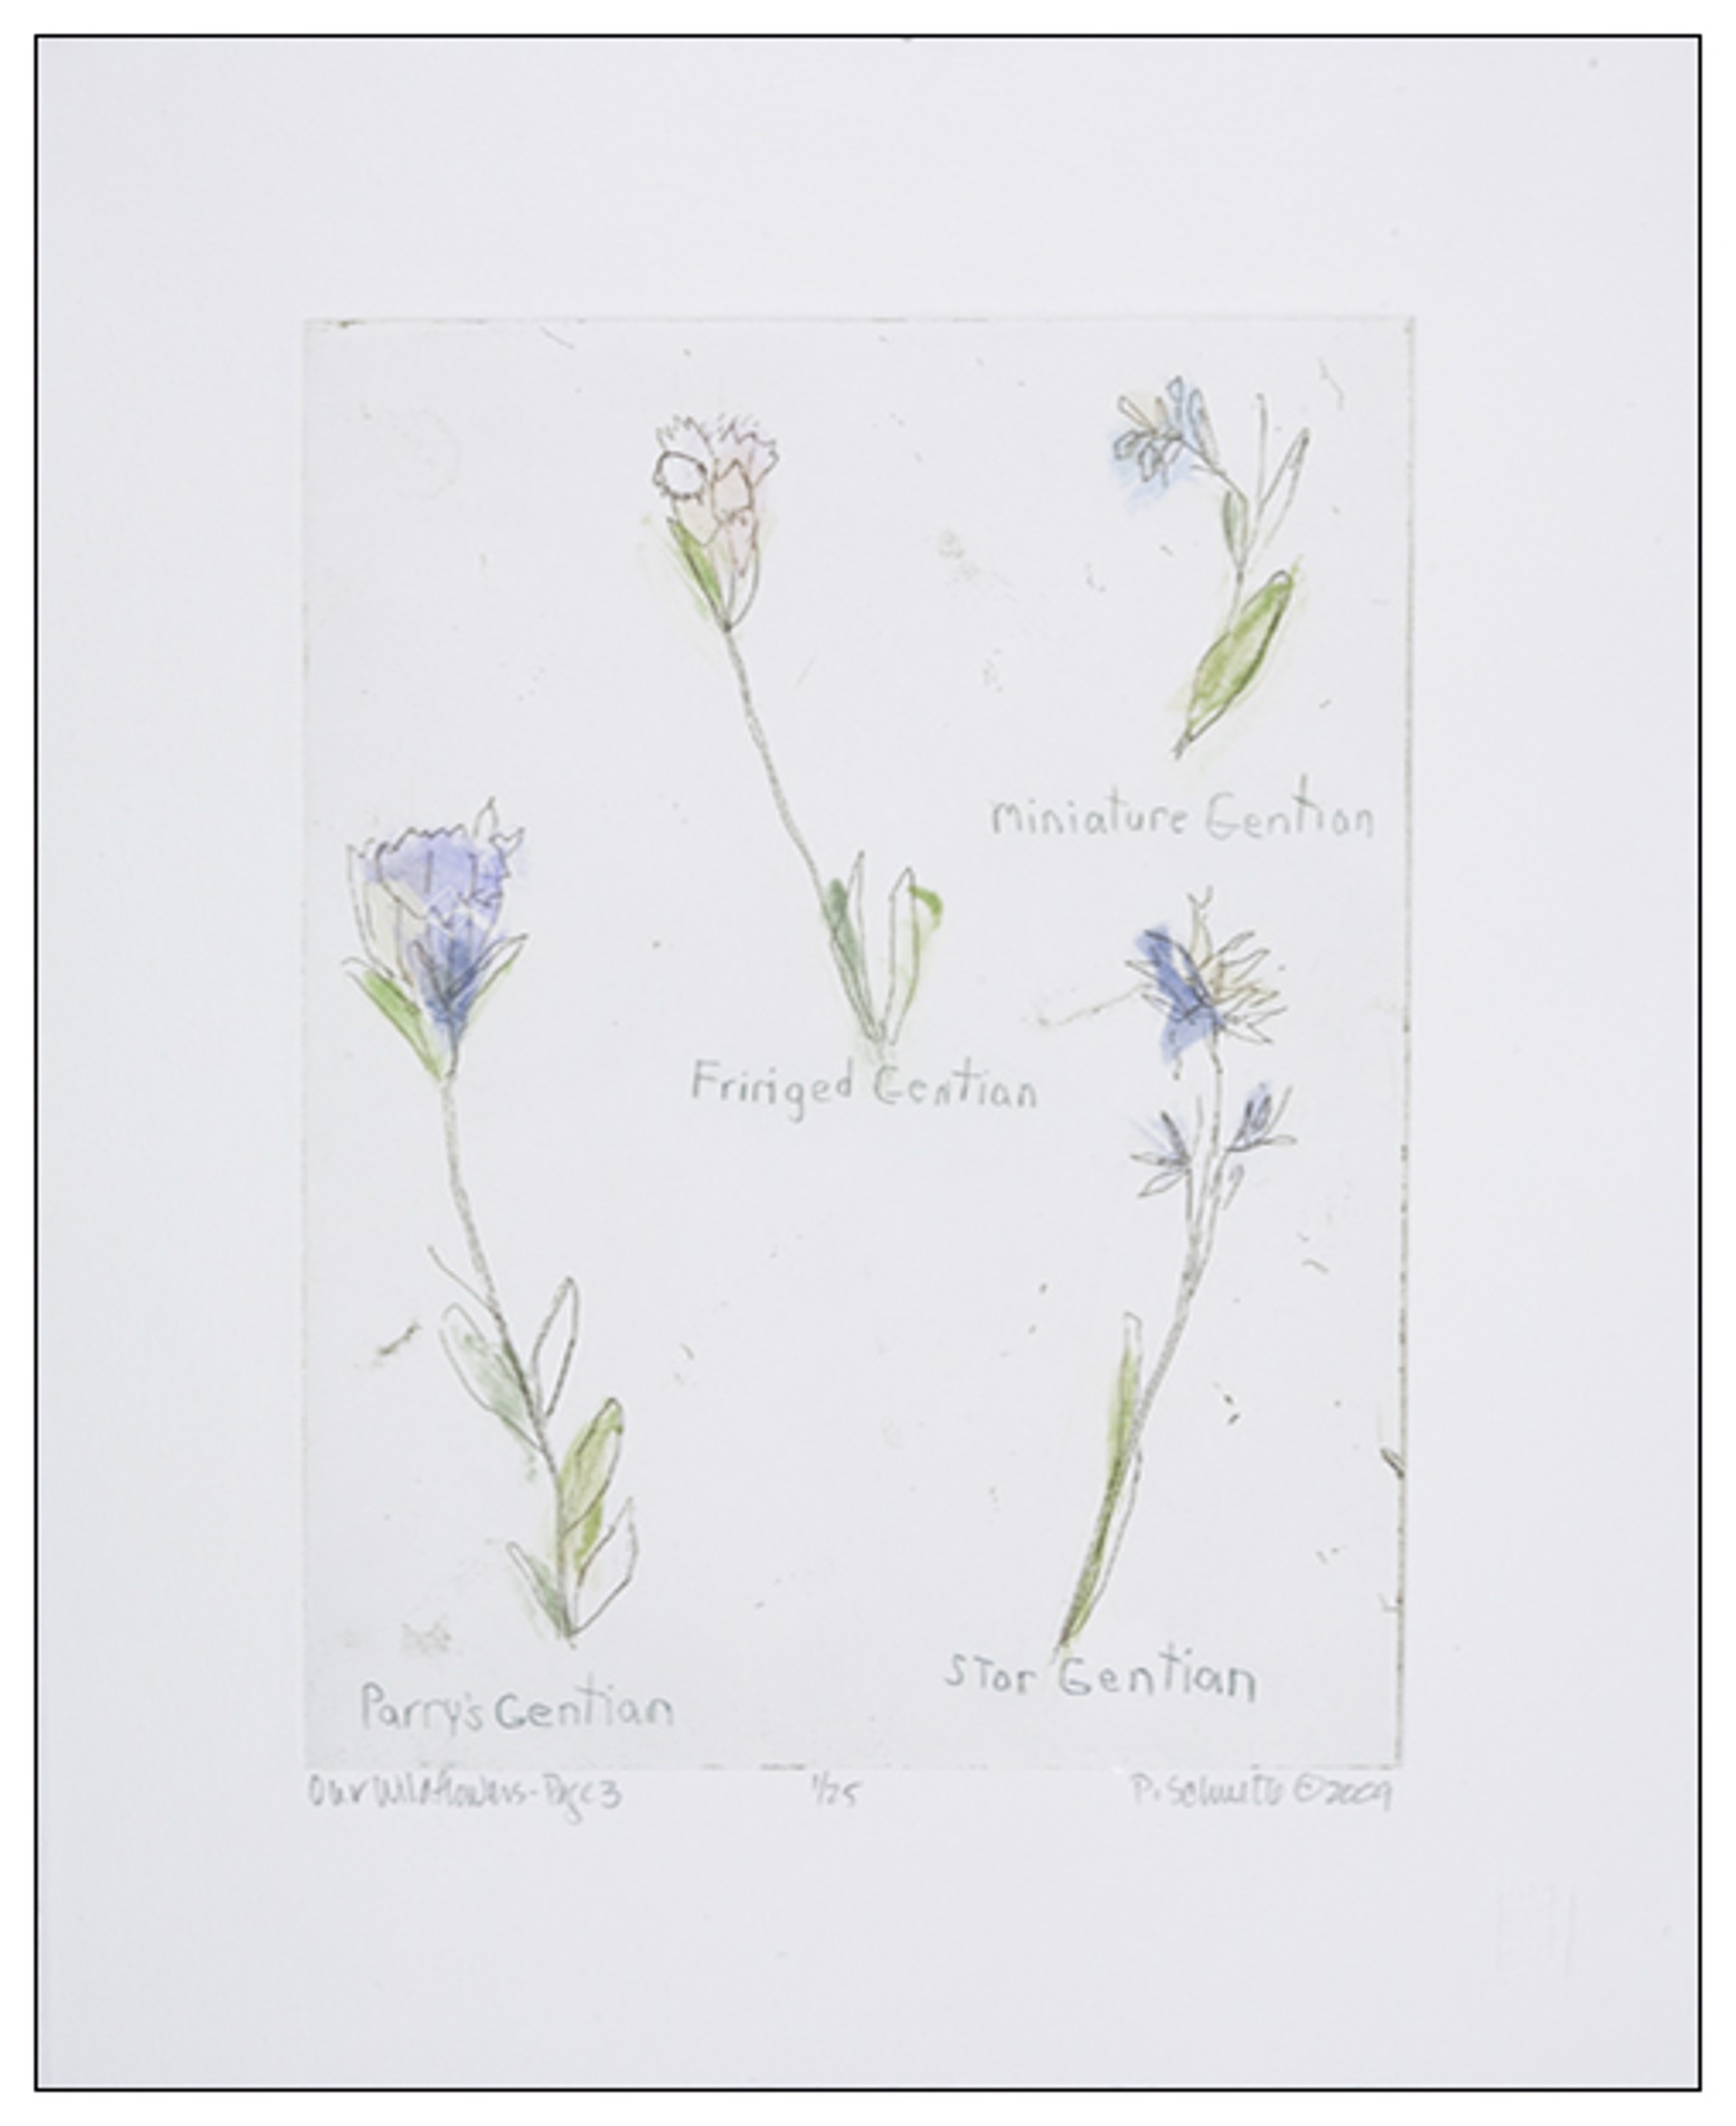 Our Wild Flowers: Page 3 by Paula Schuette Kraemer